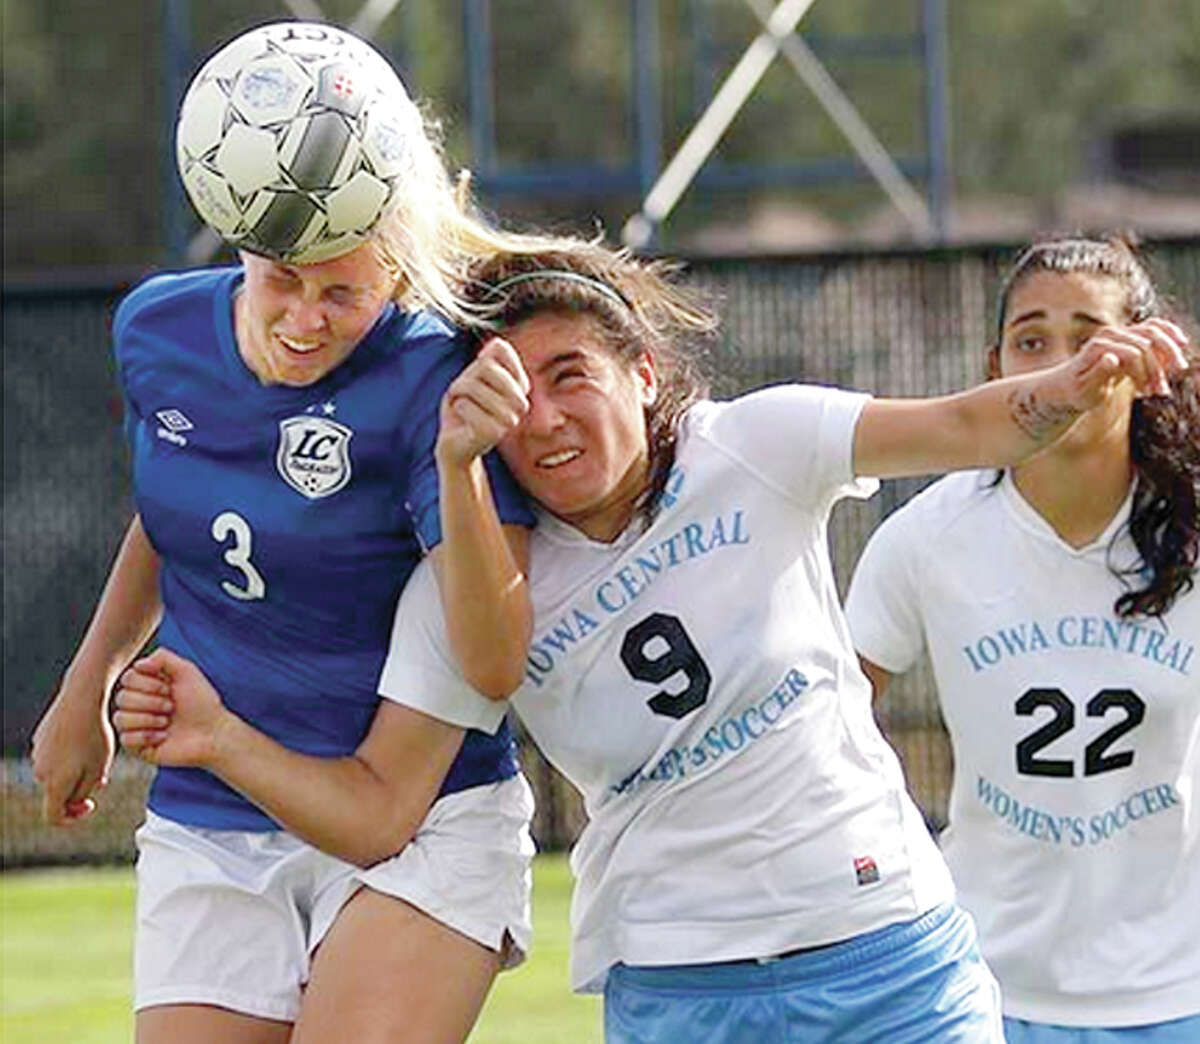 Lewis and Clark’s Nicole Howard (3) heads the ball away from Iowa Central’s Lucero Robayo (9) and Marillia Lages (22) in Wednesday’s pool play game at the NJCAA women’s National soccer Tournament in Melbourne, Fla.